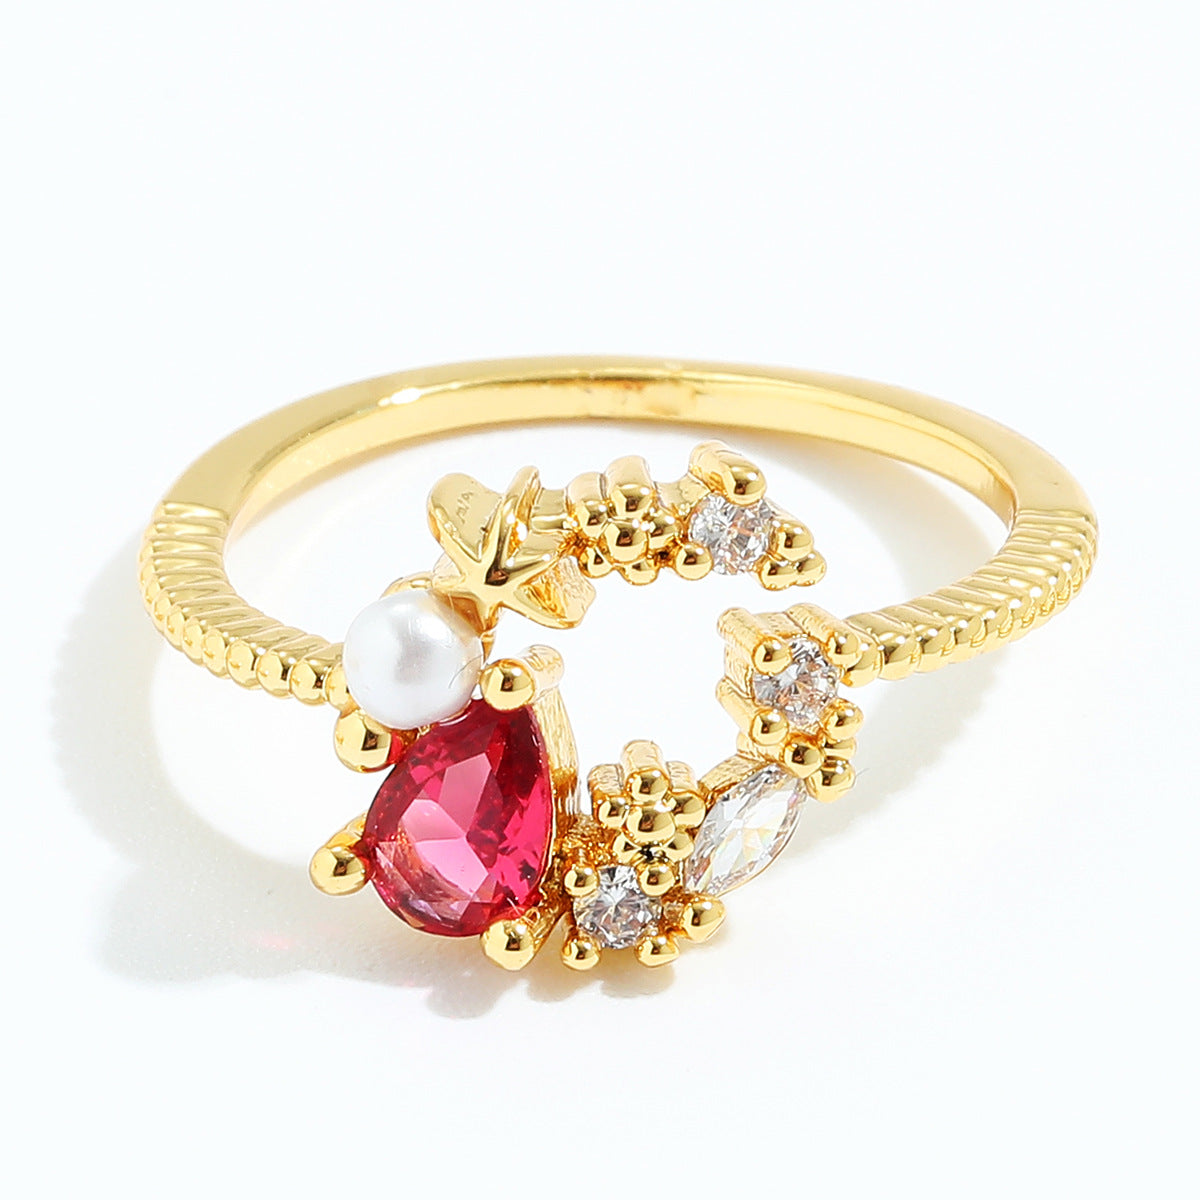 Pink Solitaire Diamond Cluster Ring